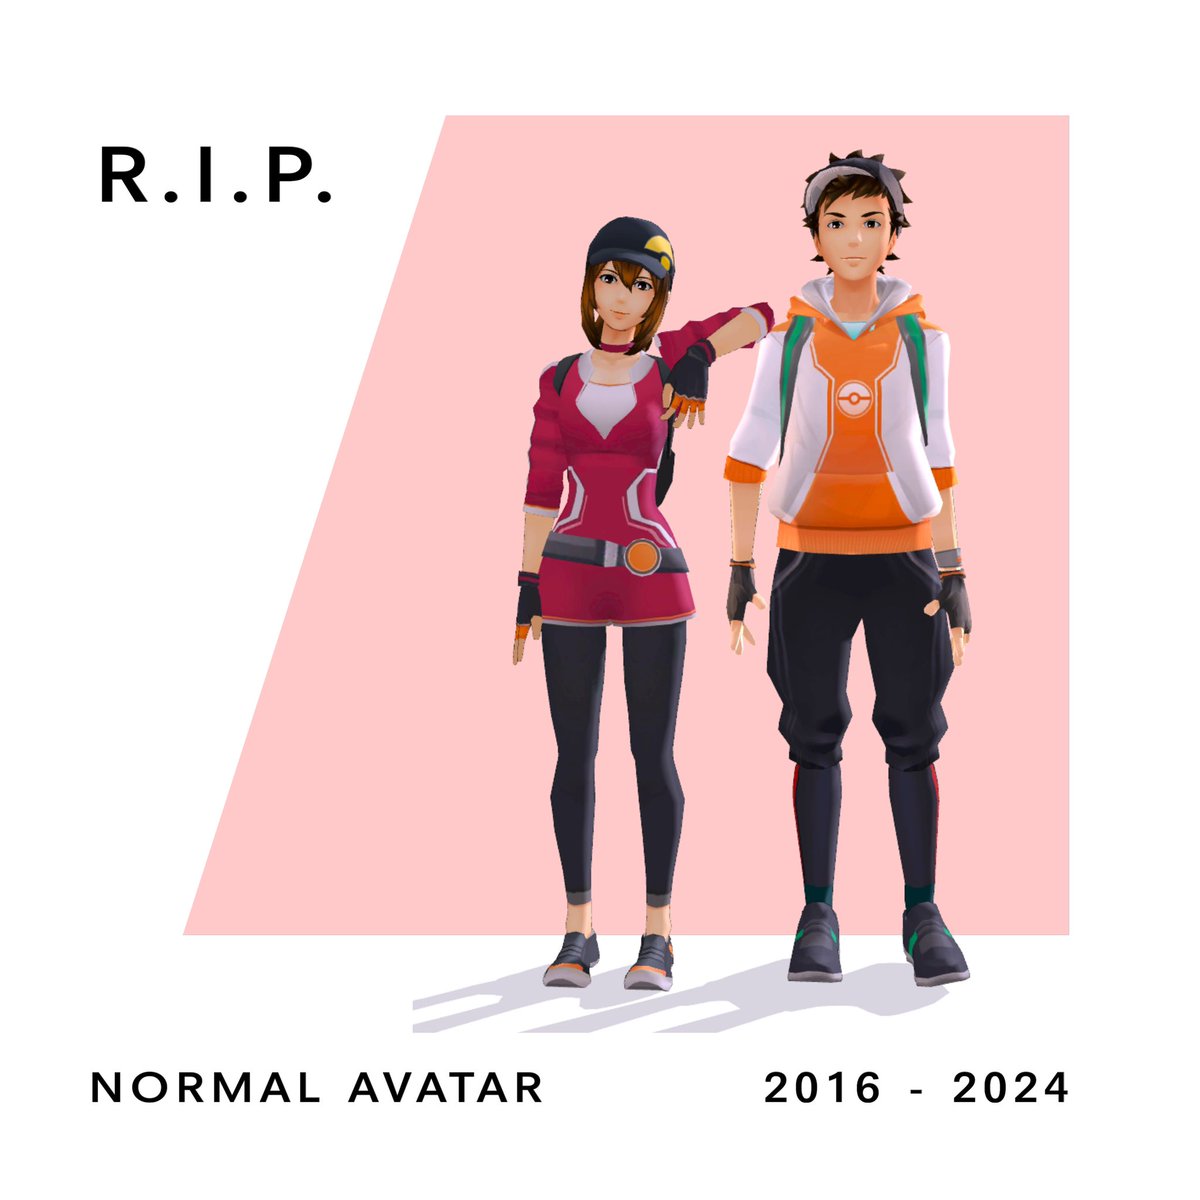 at some point in the next 24 hours, we bid farewell to the avatar we all grew to love let’s now hold a minute silence for the fallen :(